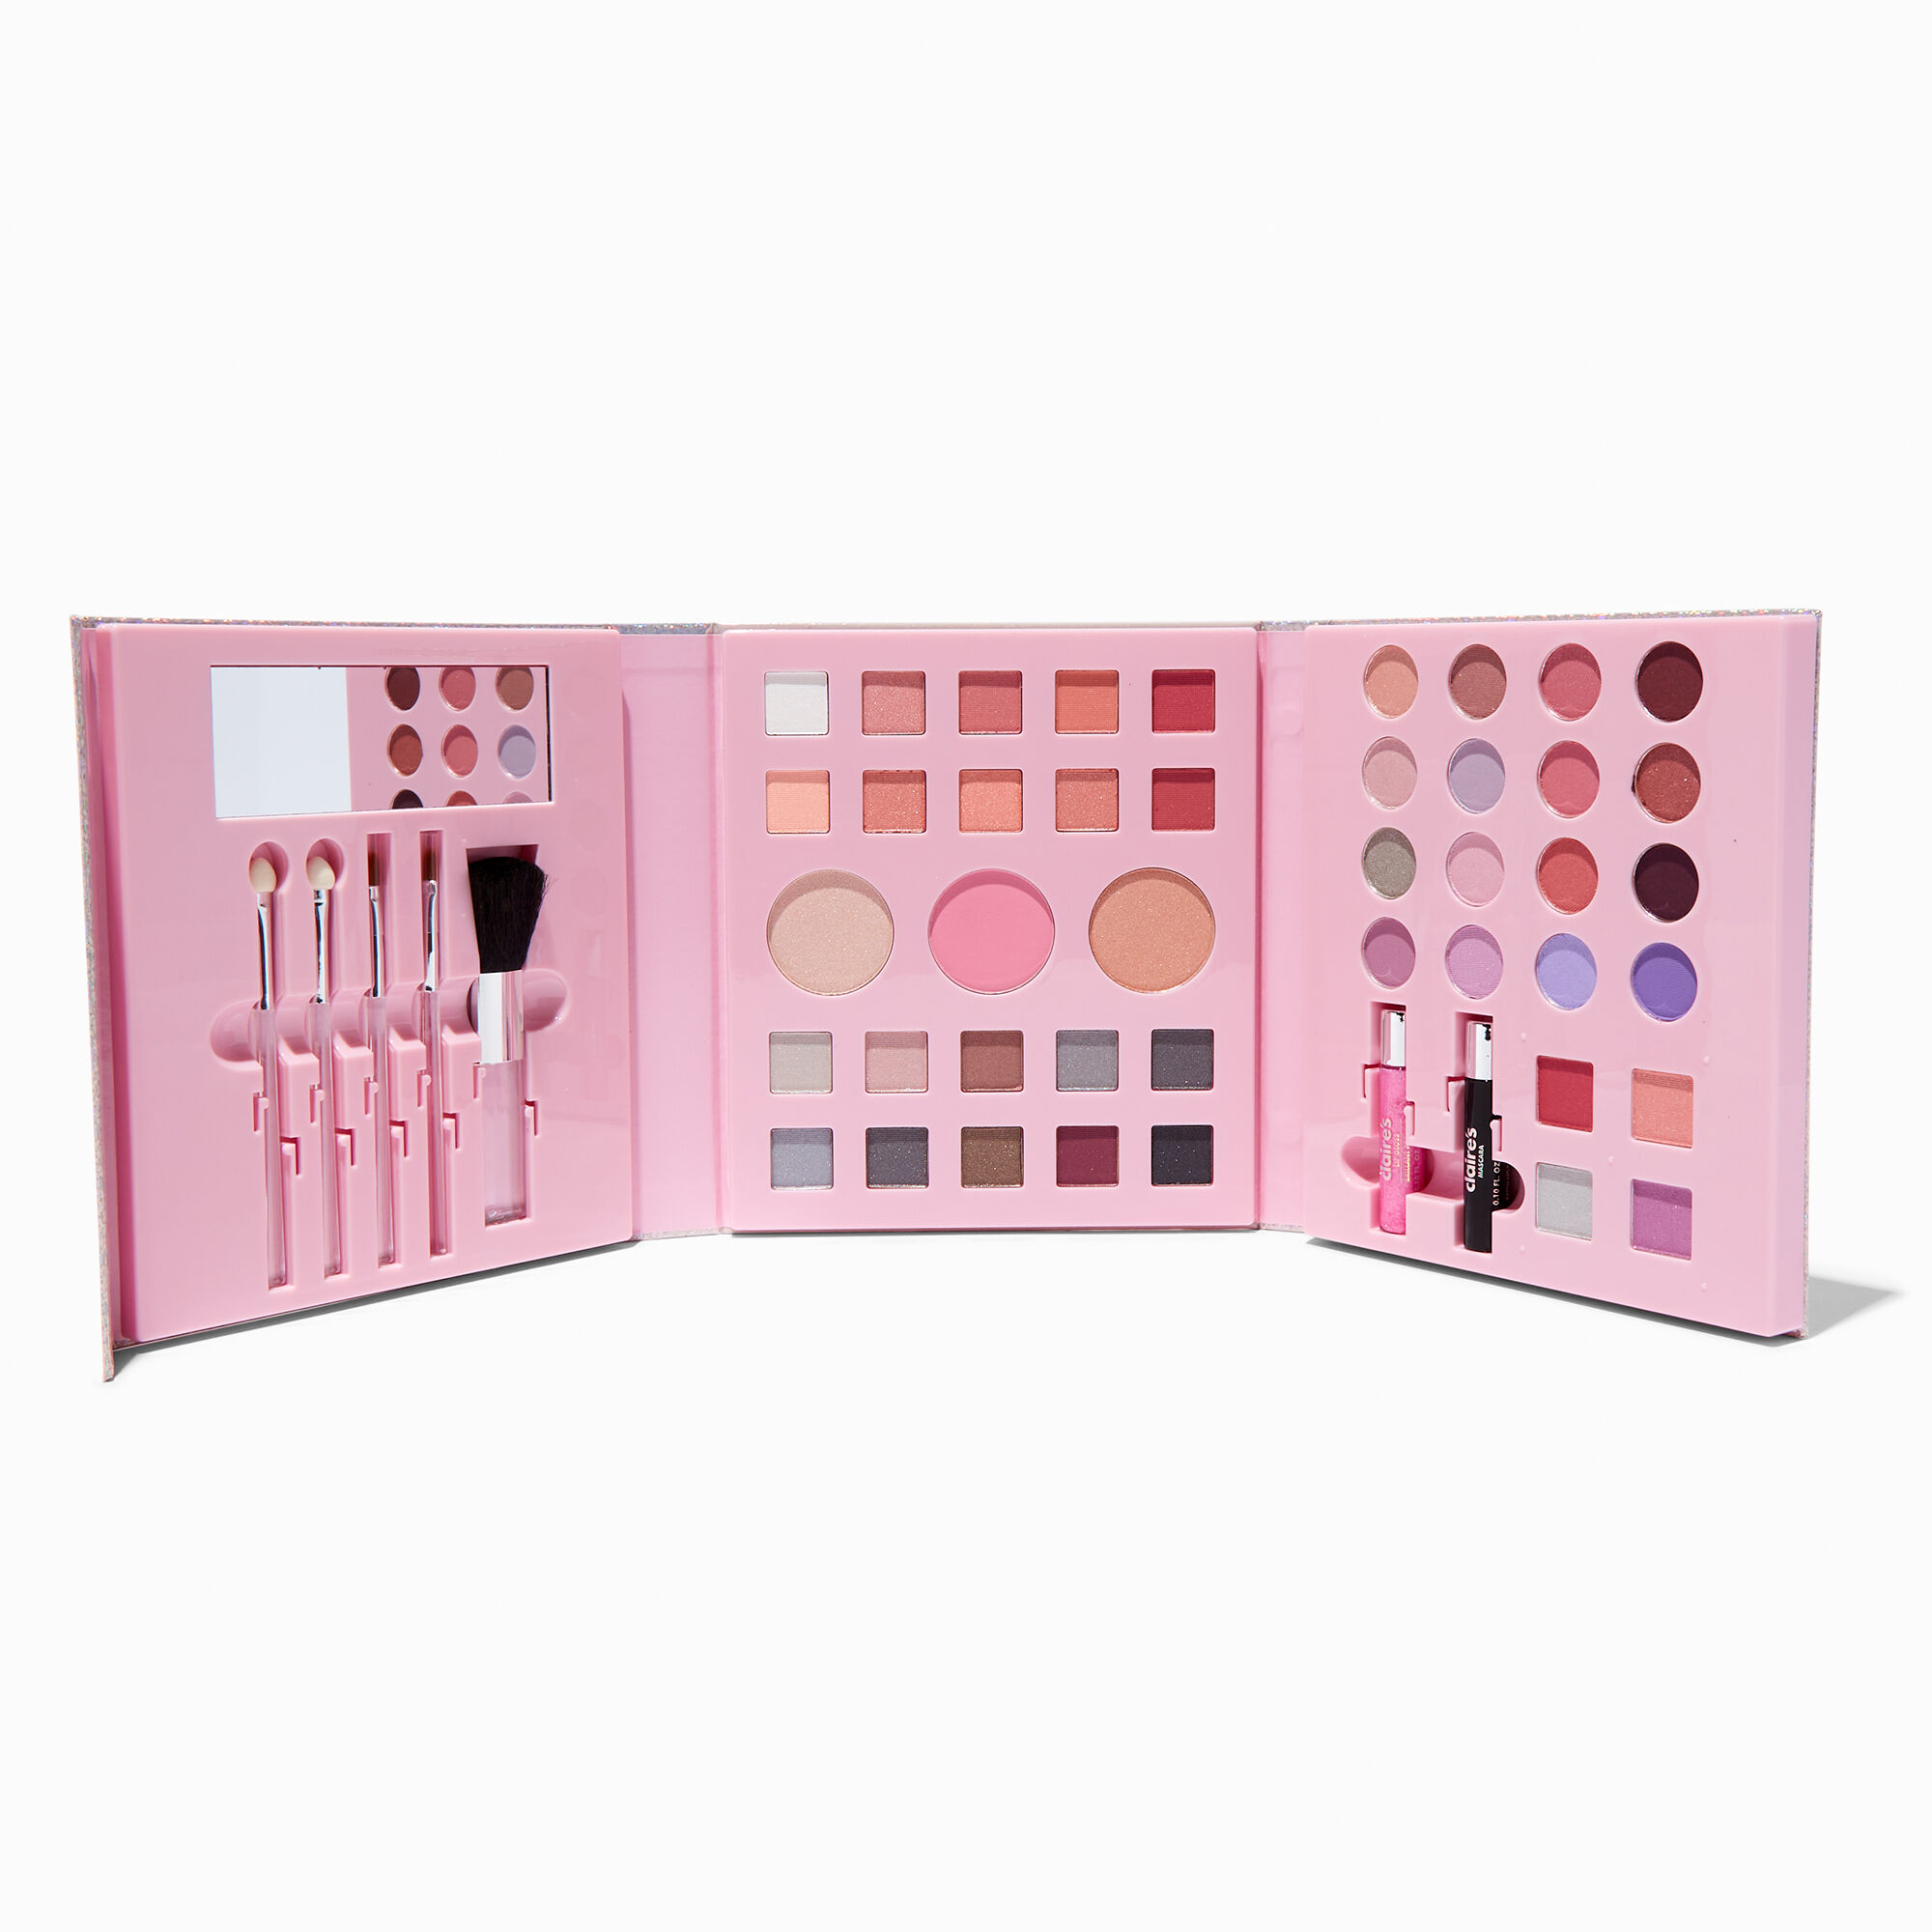 View Claires Bling 48 Piece Makeup Set Pink information